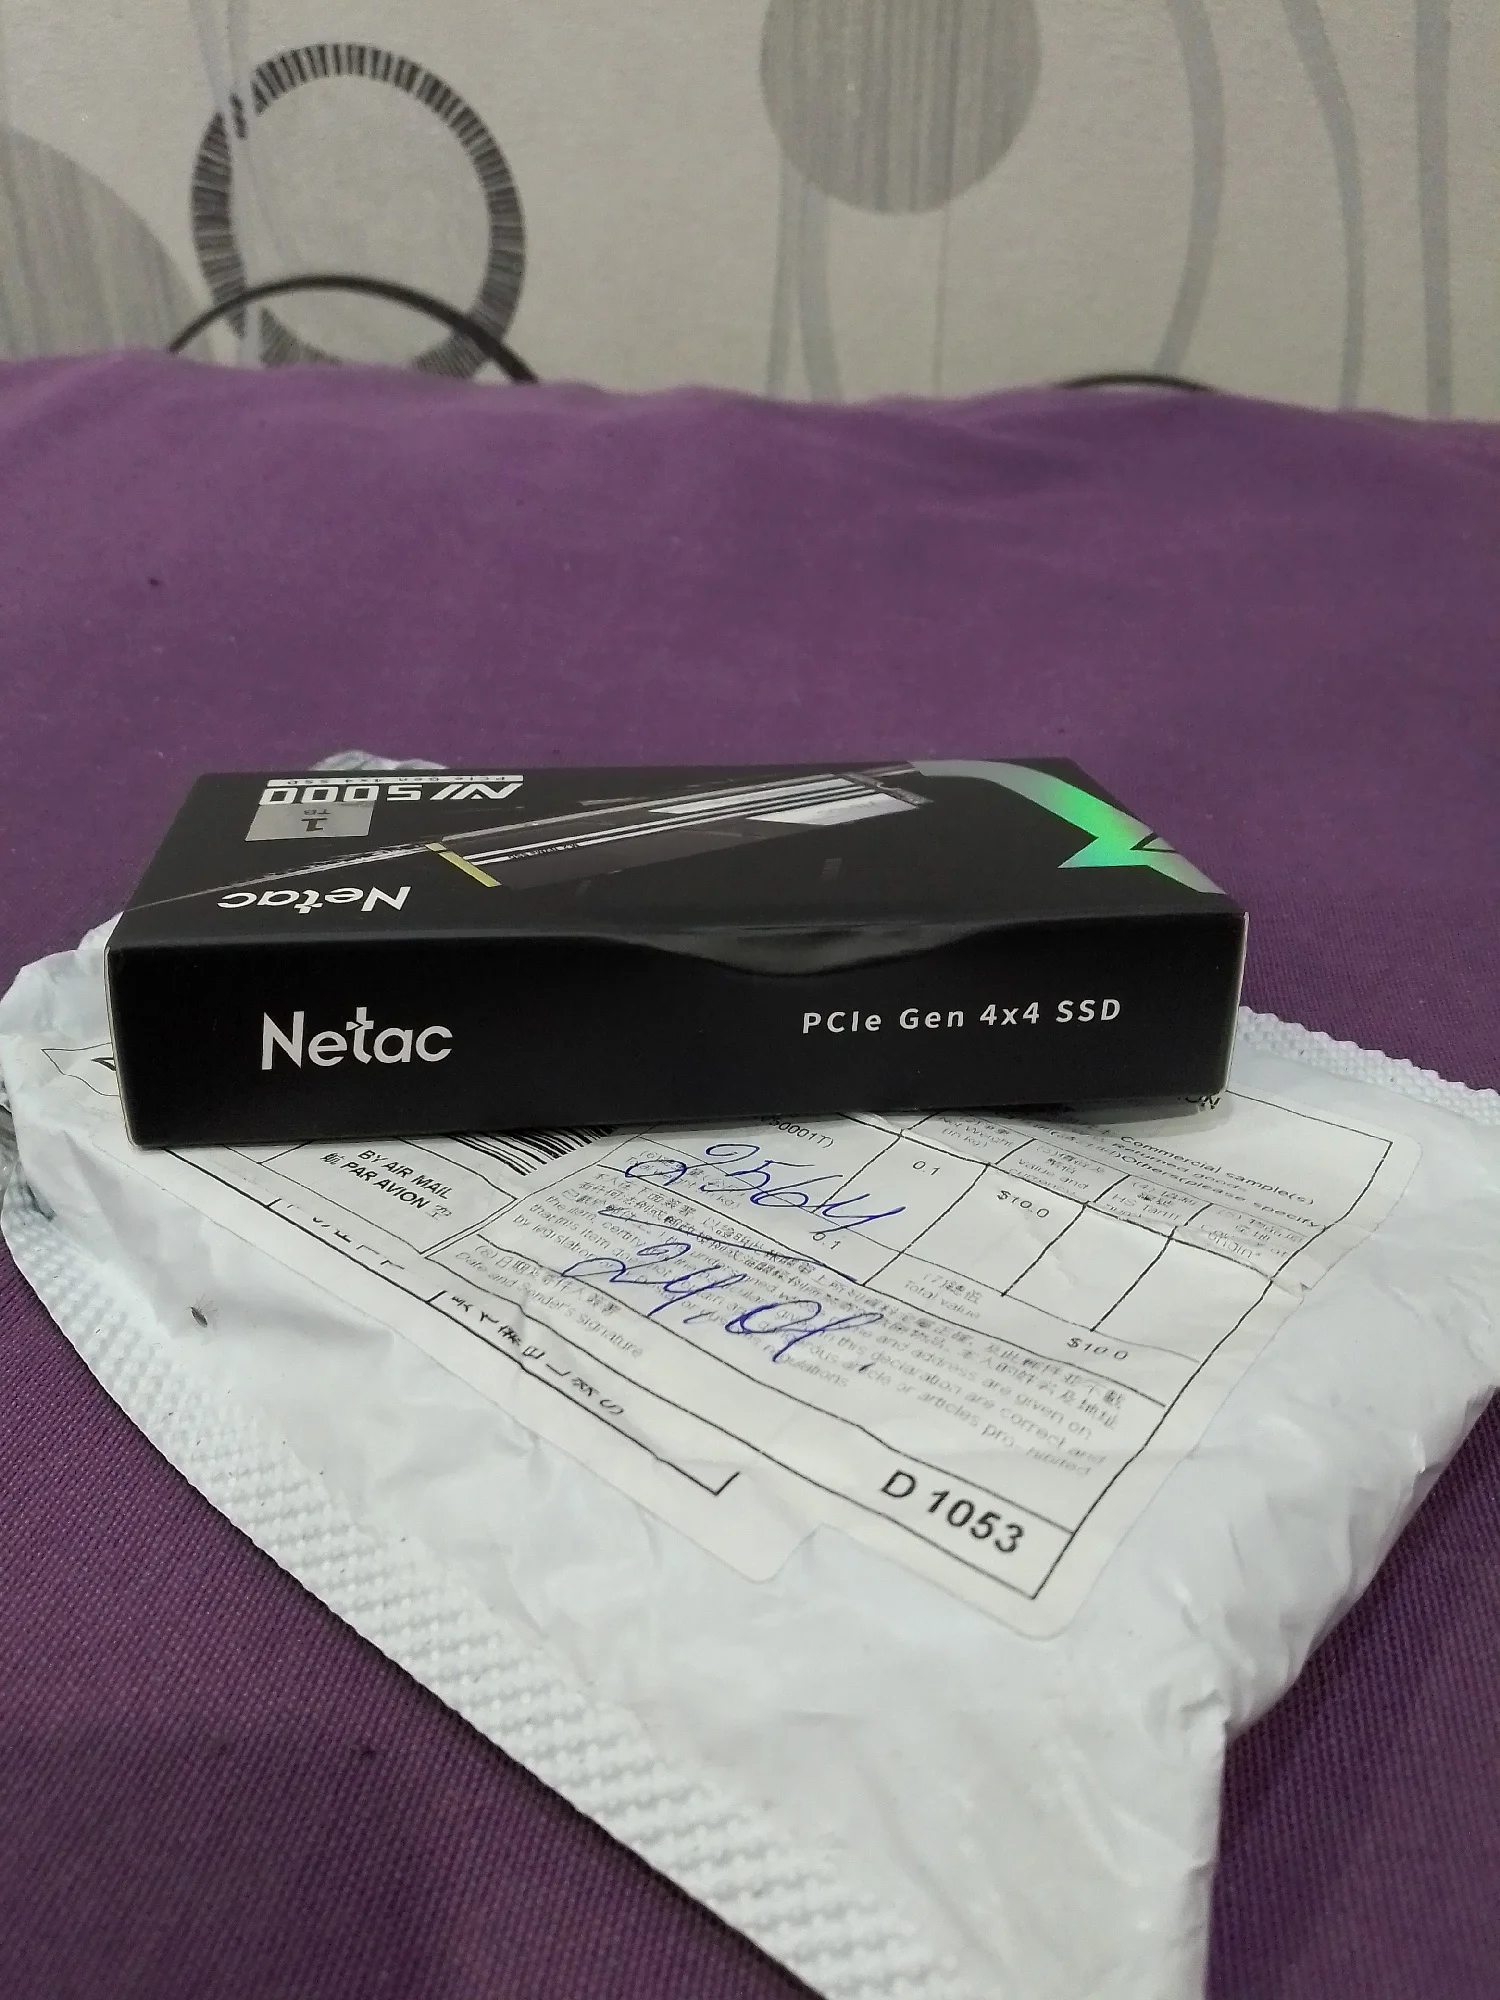 Netac M2 SSD NVME SSD 1tb 2tb 512gb 256gb 128gb M.2 2280 PCIe 500gb 250gb Internal Solid State Drives Hard Disk photo review